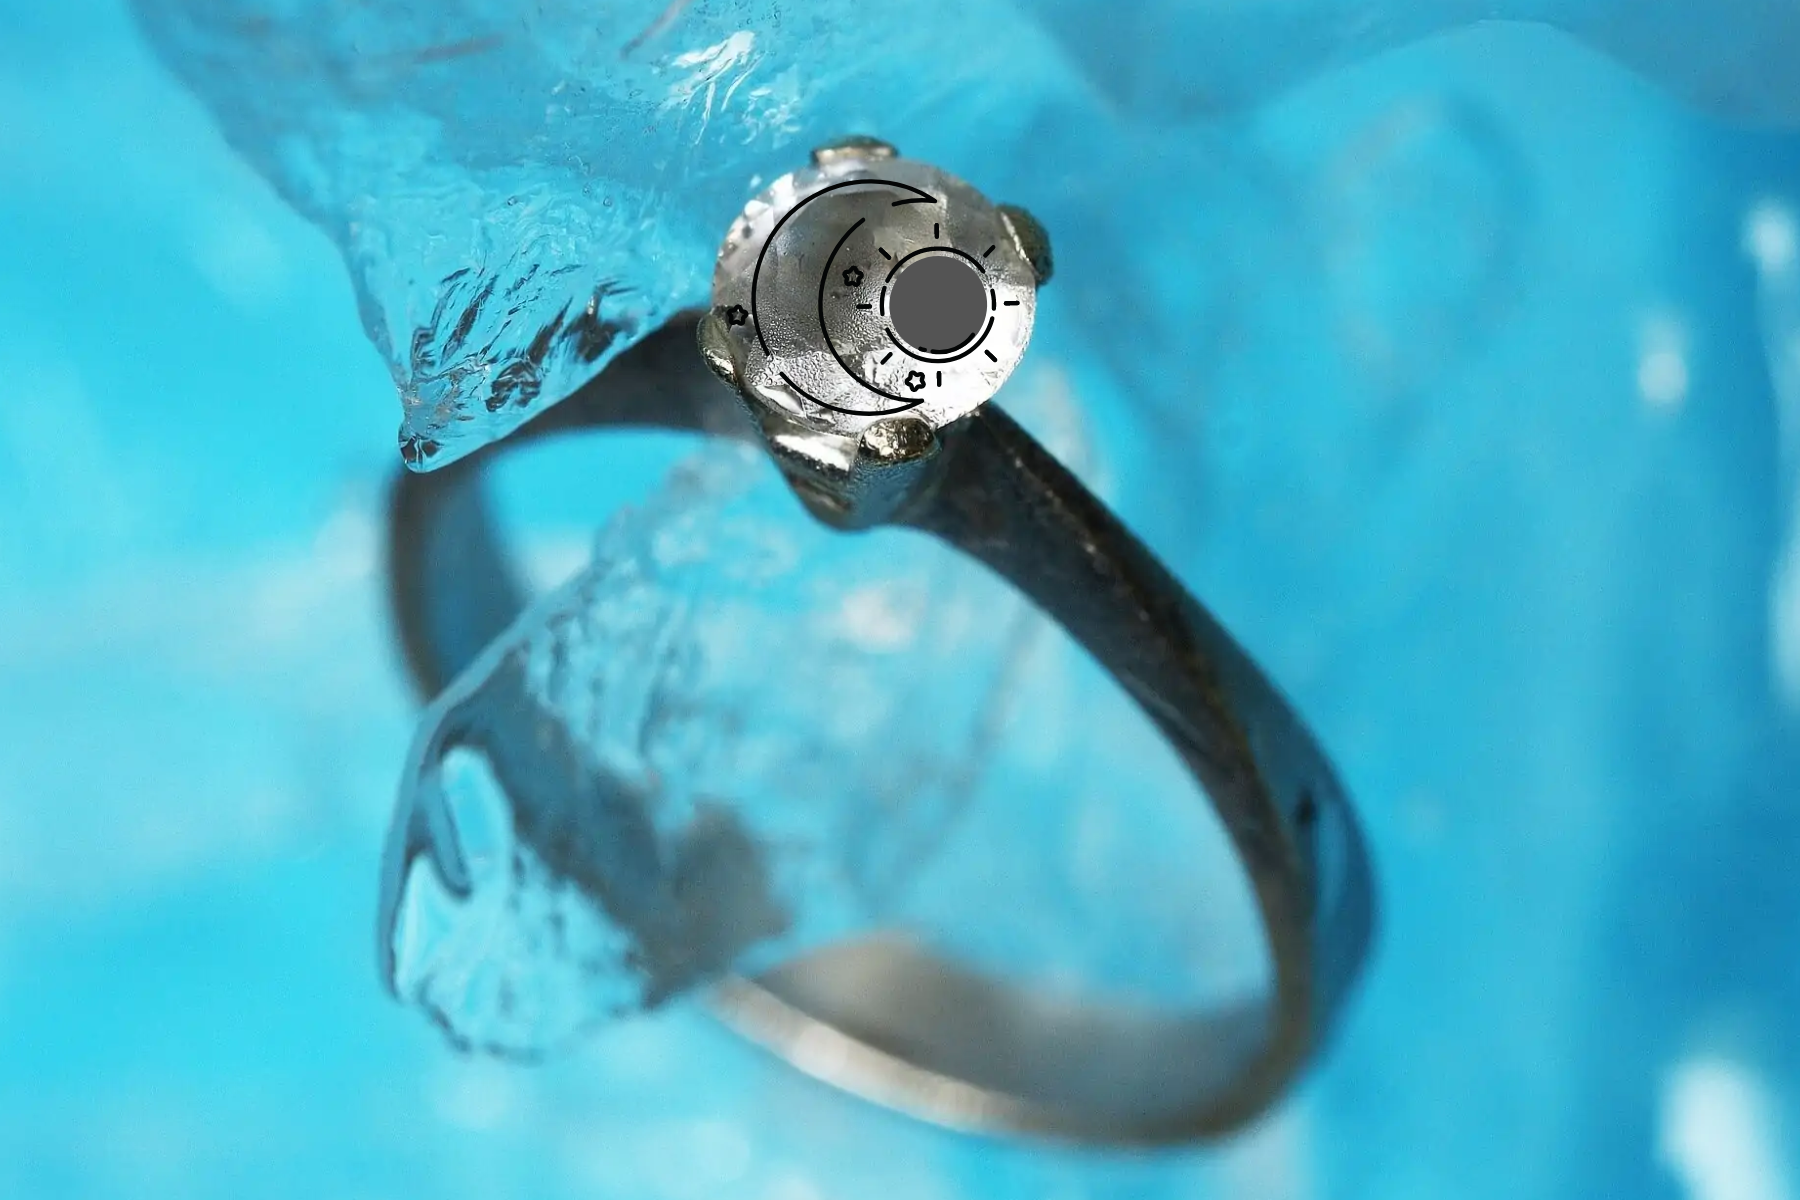 A platinum ring with sun and moon symbols that has been immersed in water